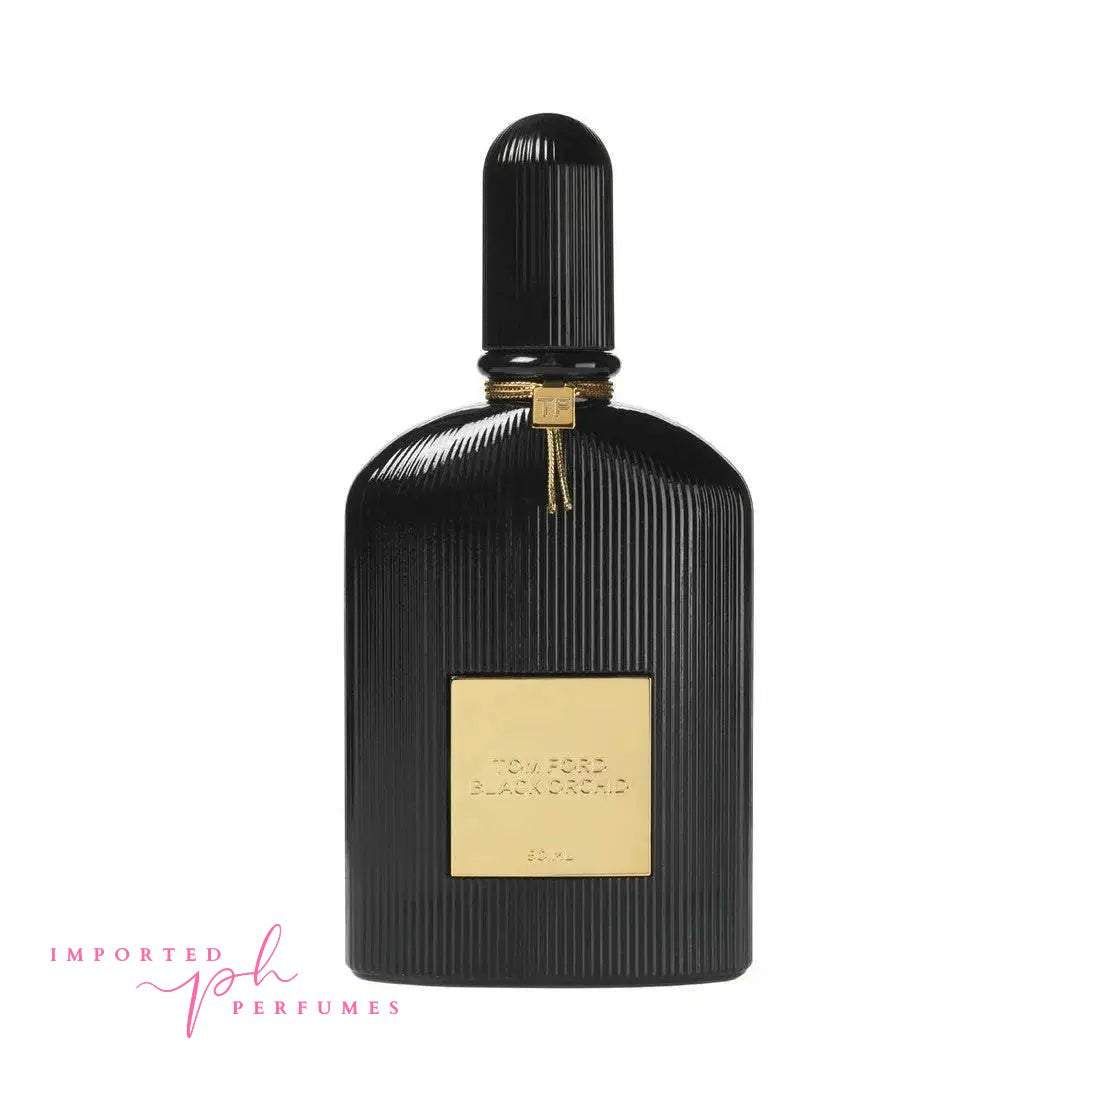 [TESTER] Black Orchid Tom Ford Eau De Parfum For Women 100ml-Imported Perfumes Co-black orchid,TESTER,tom ford,women